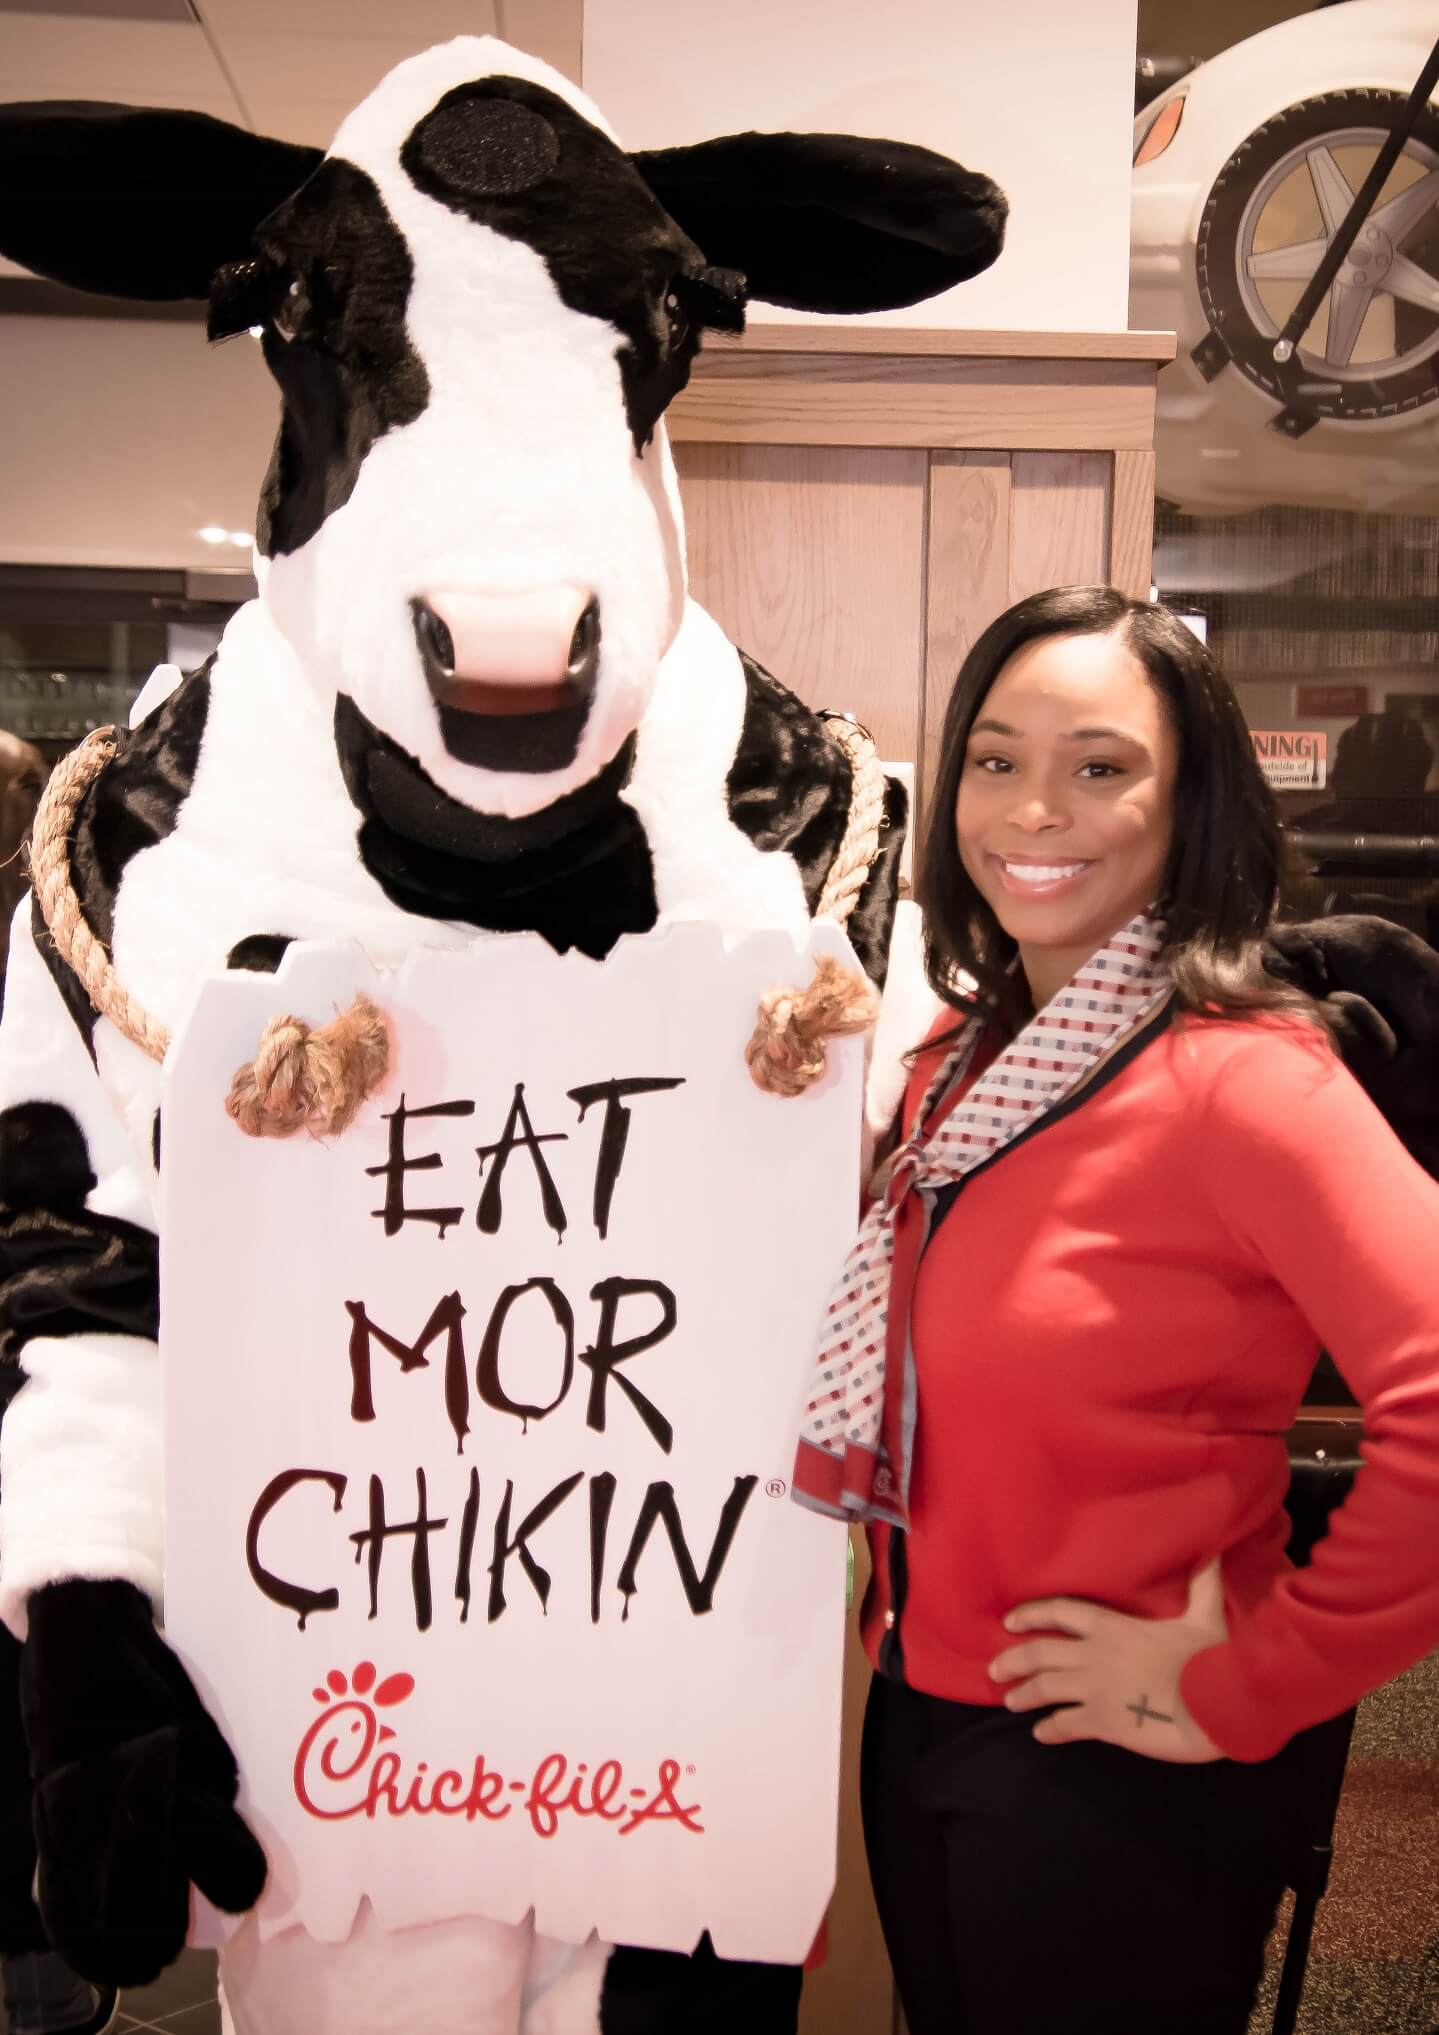 Florissant, MO Operator, Tasha Fox, with the Chick-fil-A cow